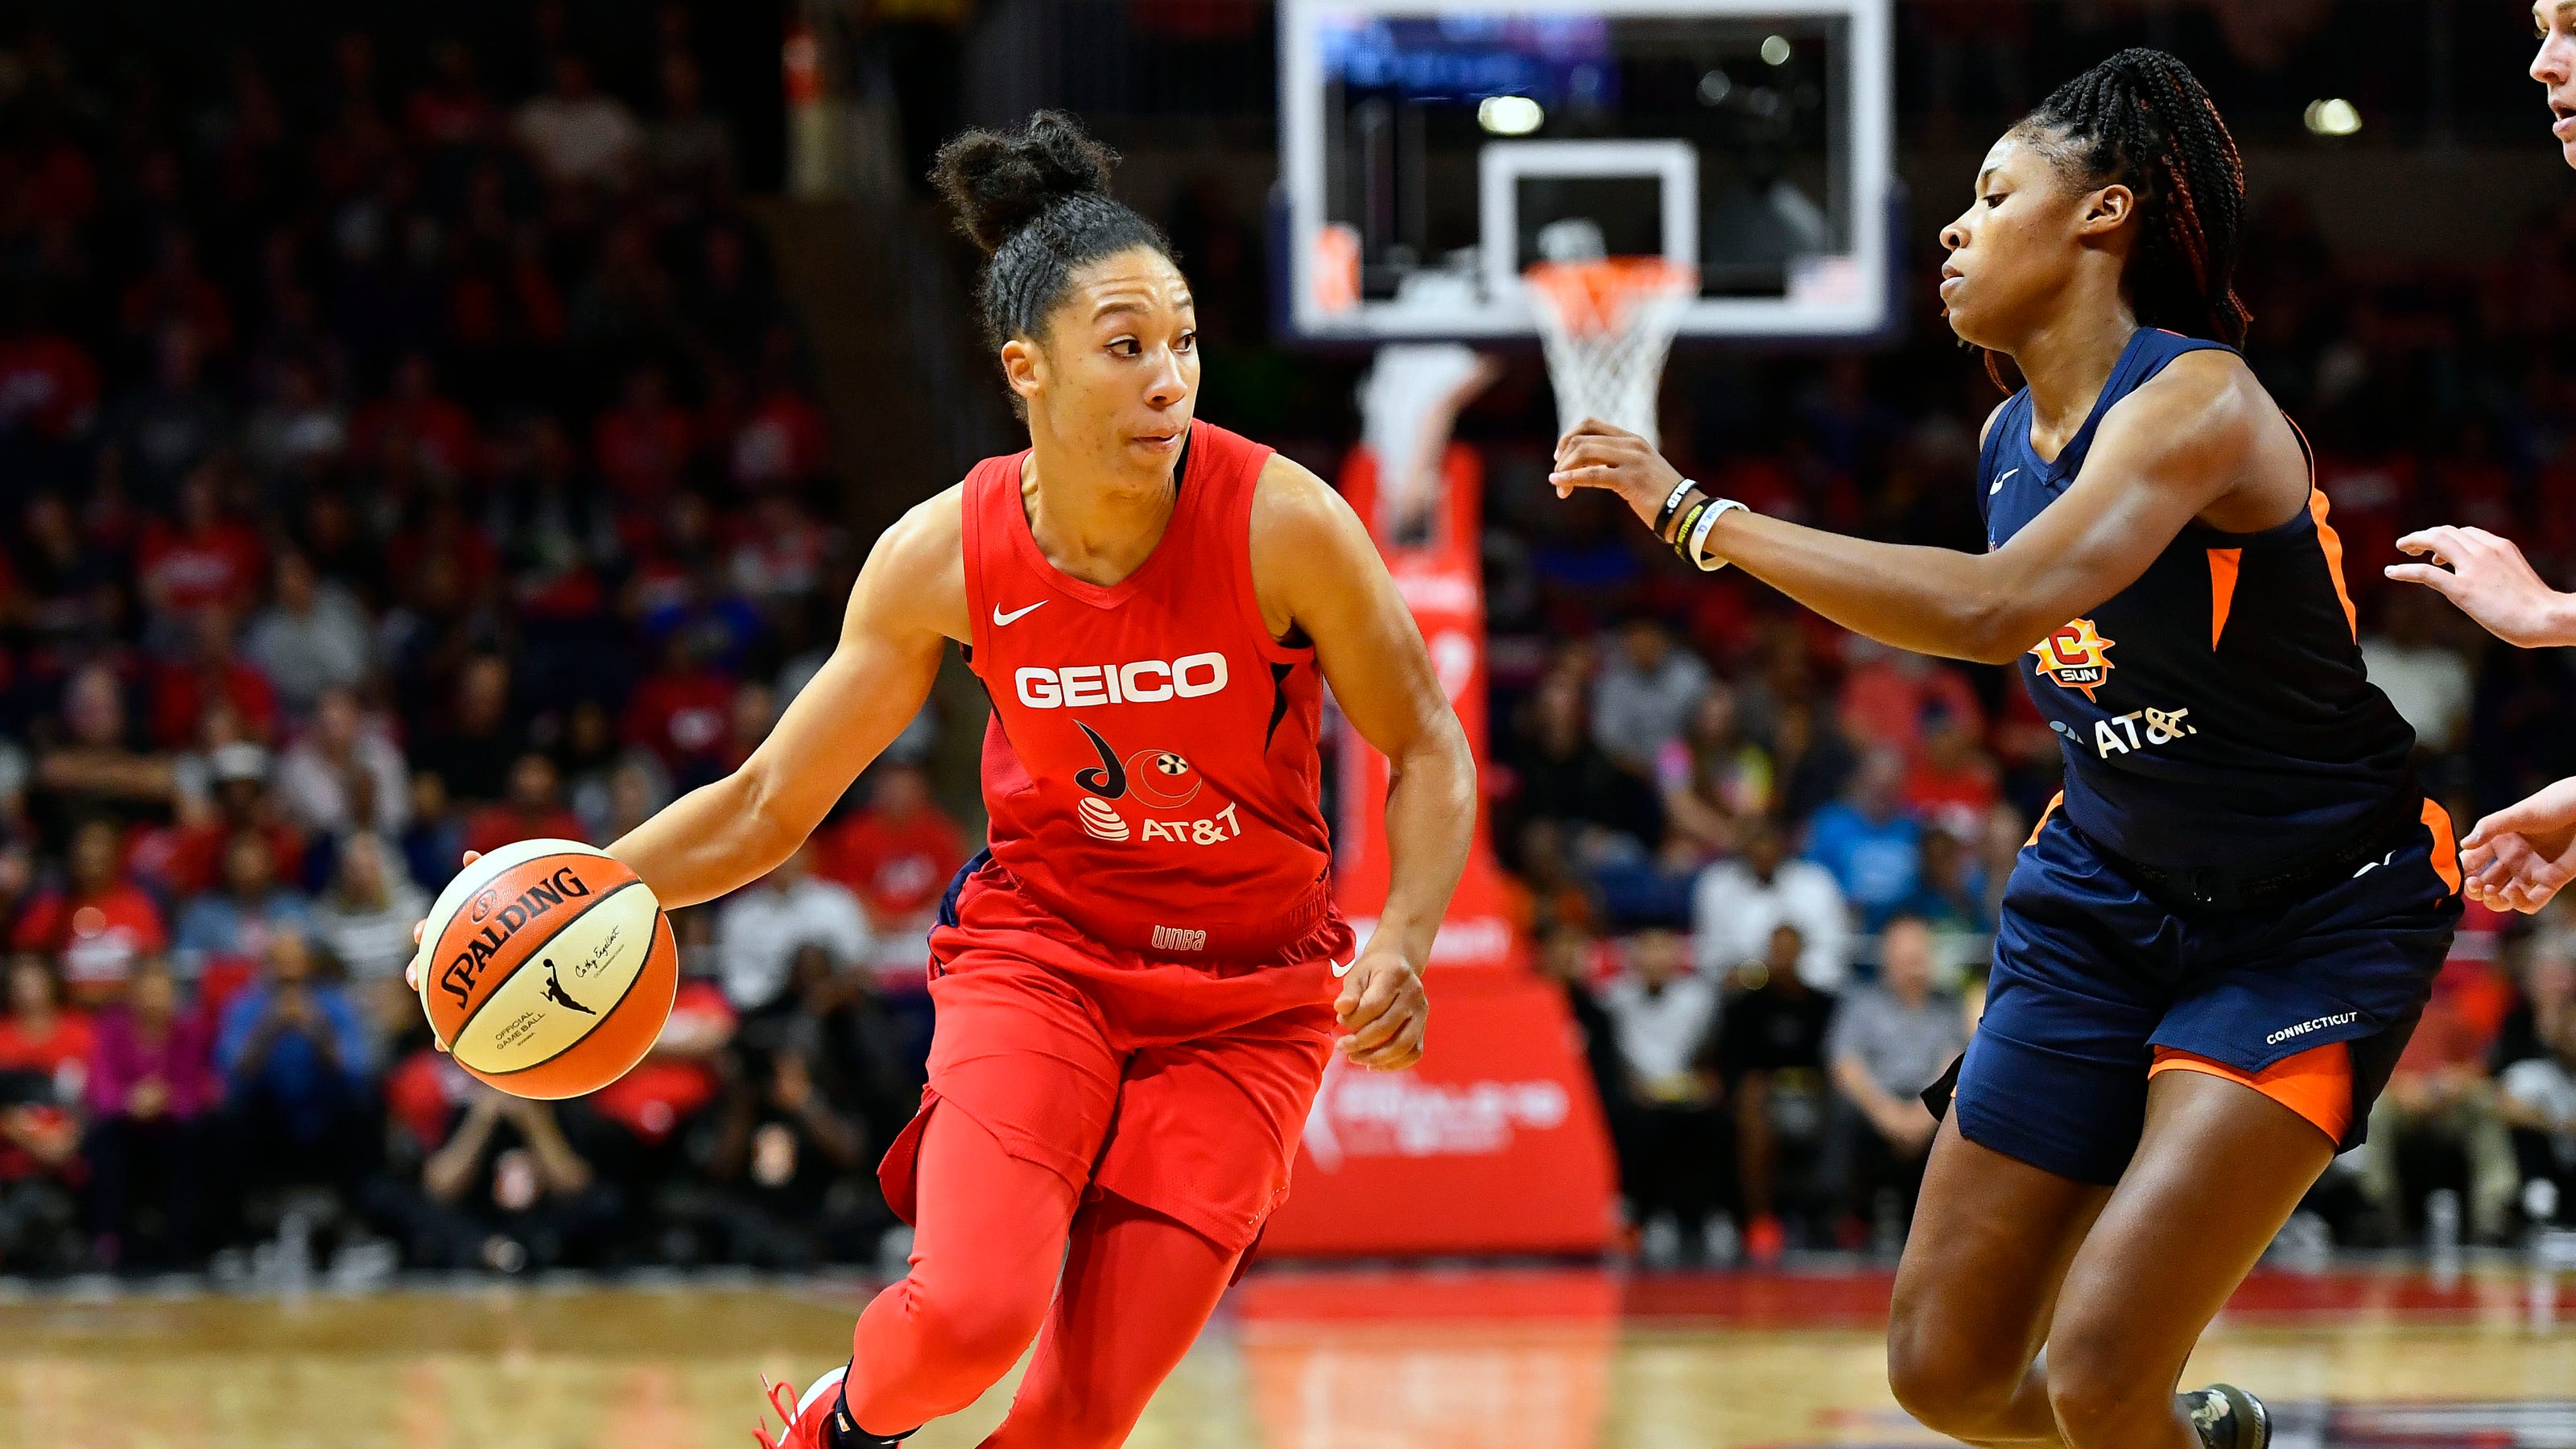 WNBA players New NBA 2K21 features for women's game 'just surreal'